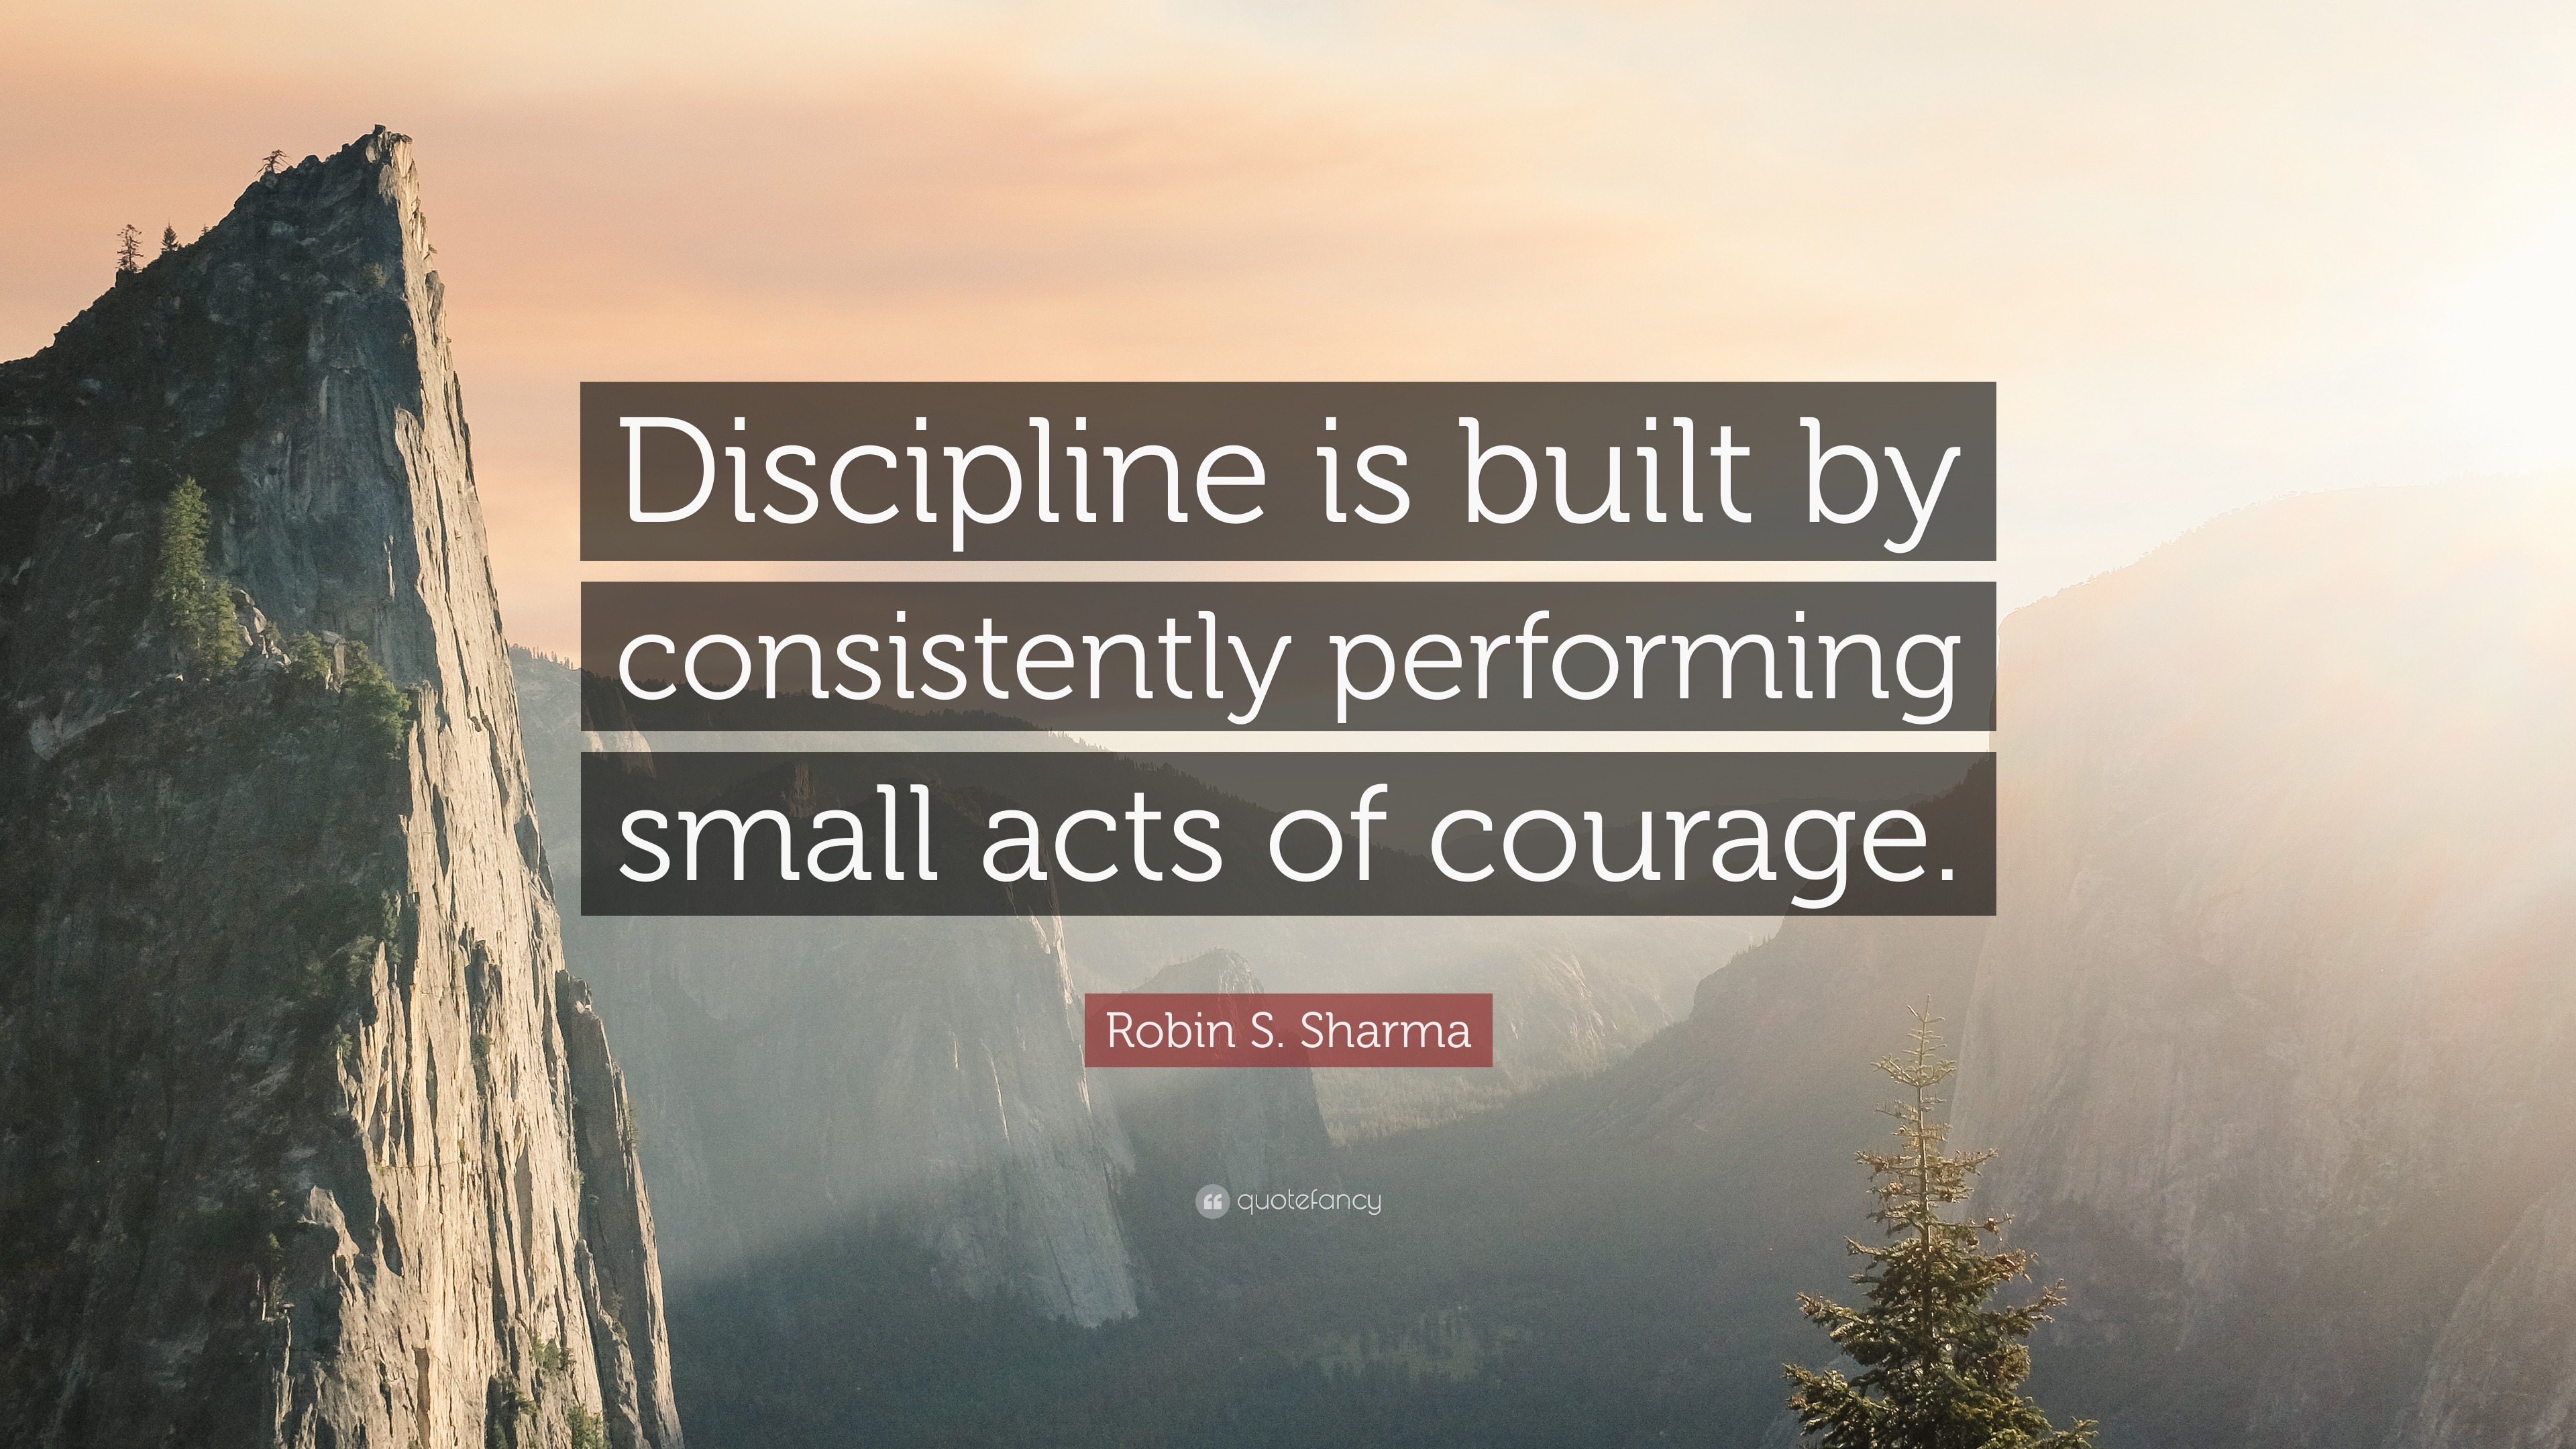 Robin S. Sharma Quote: “Discipline is built by consistently performing ...